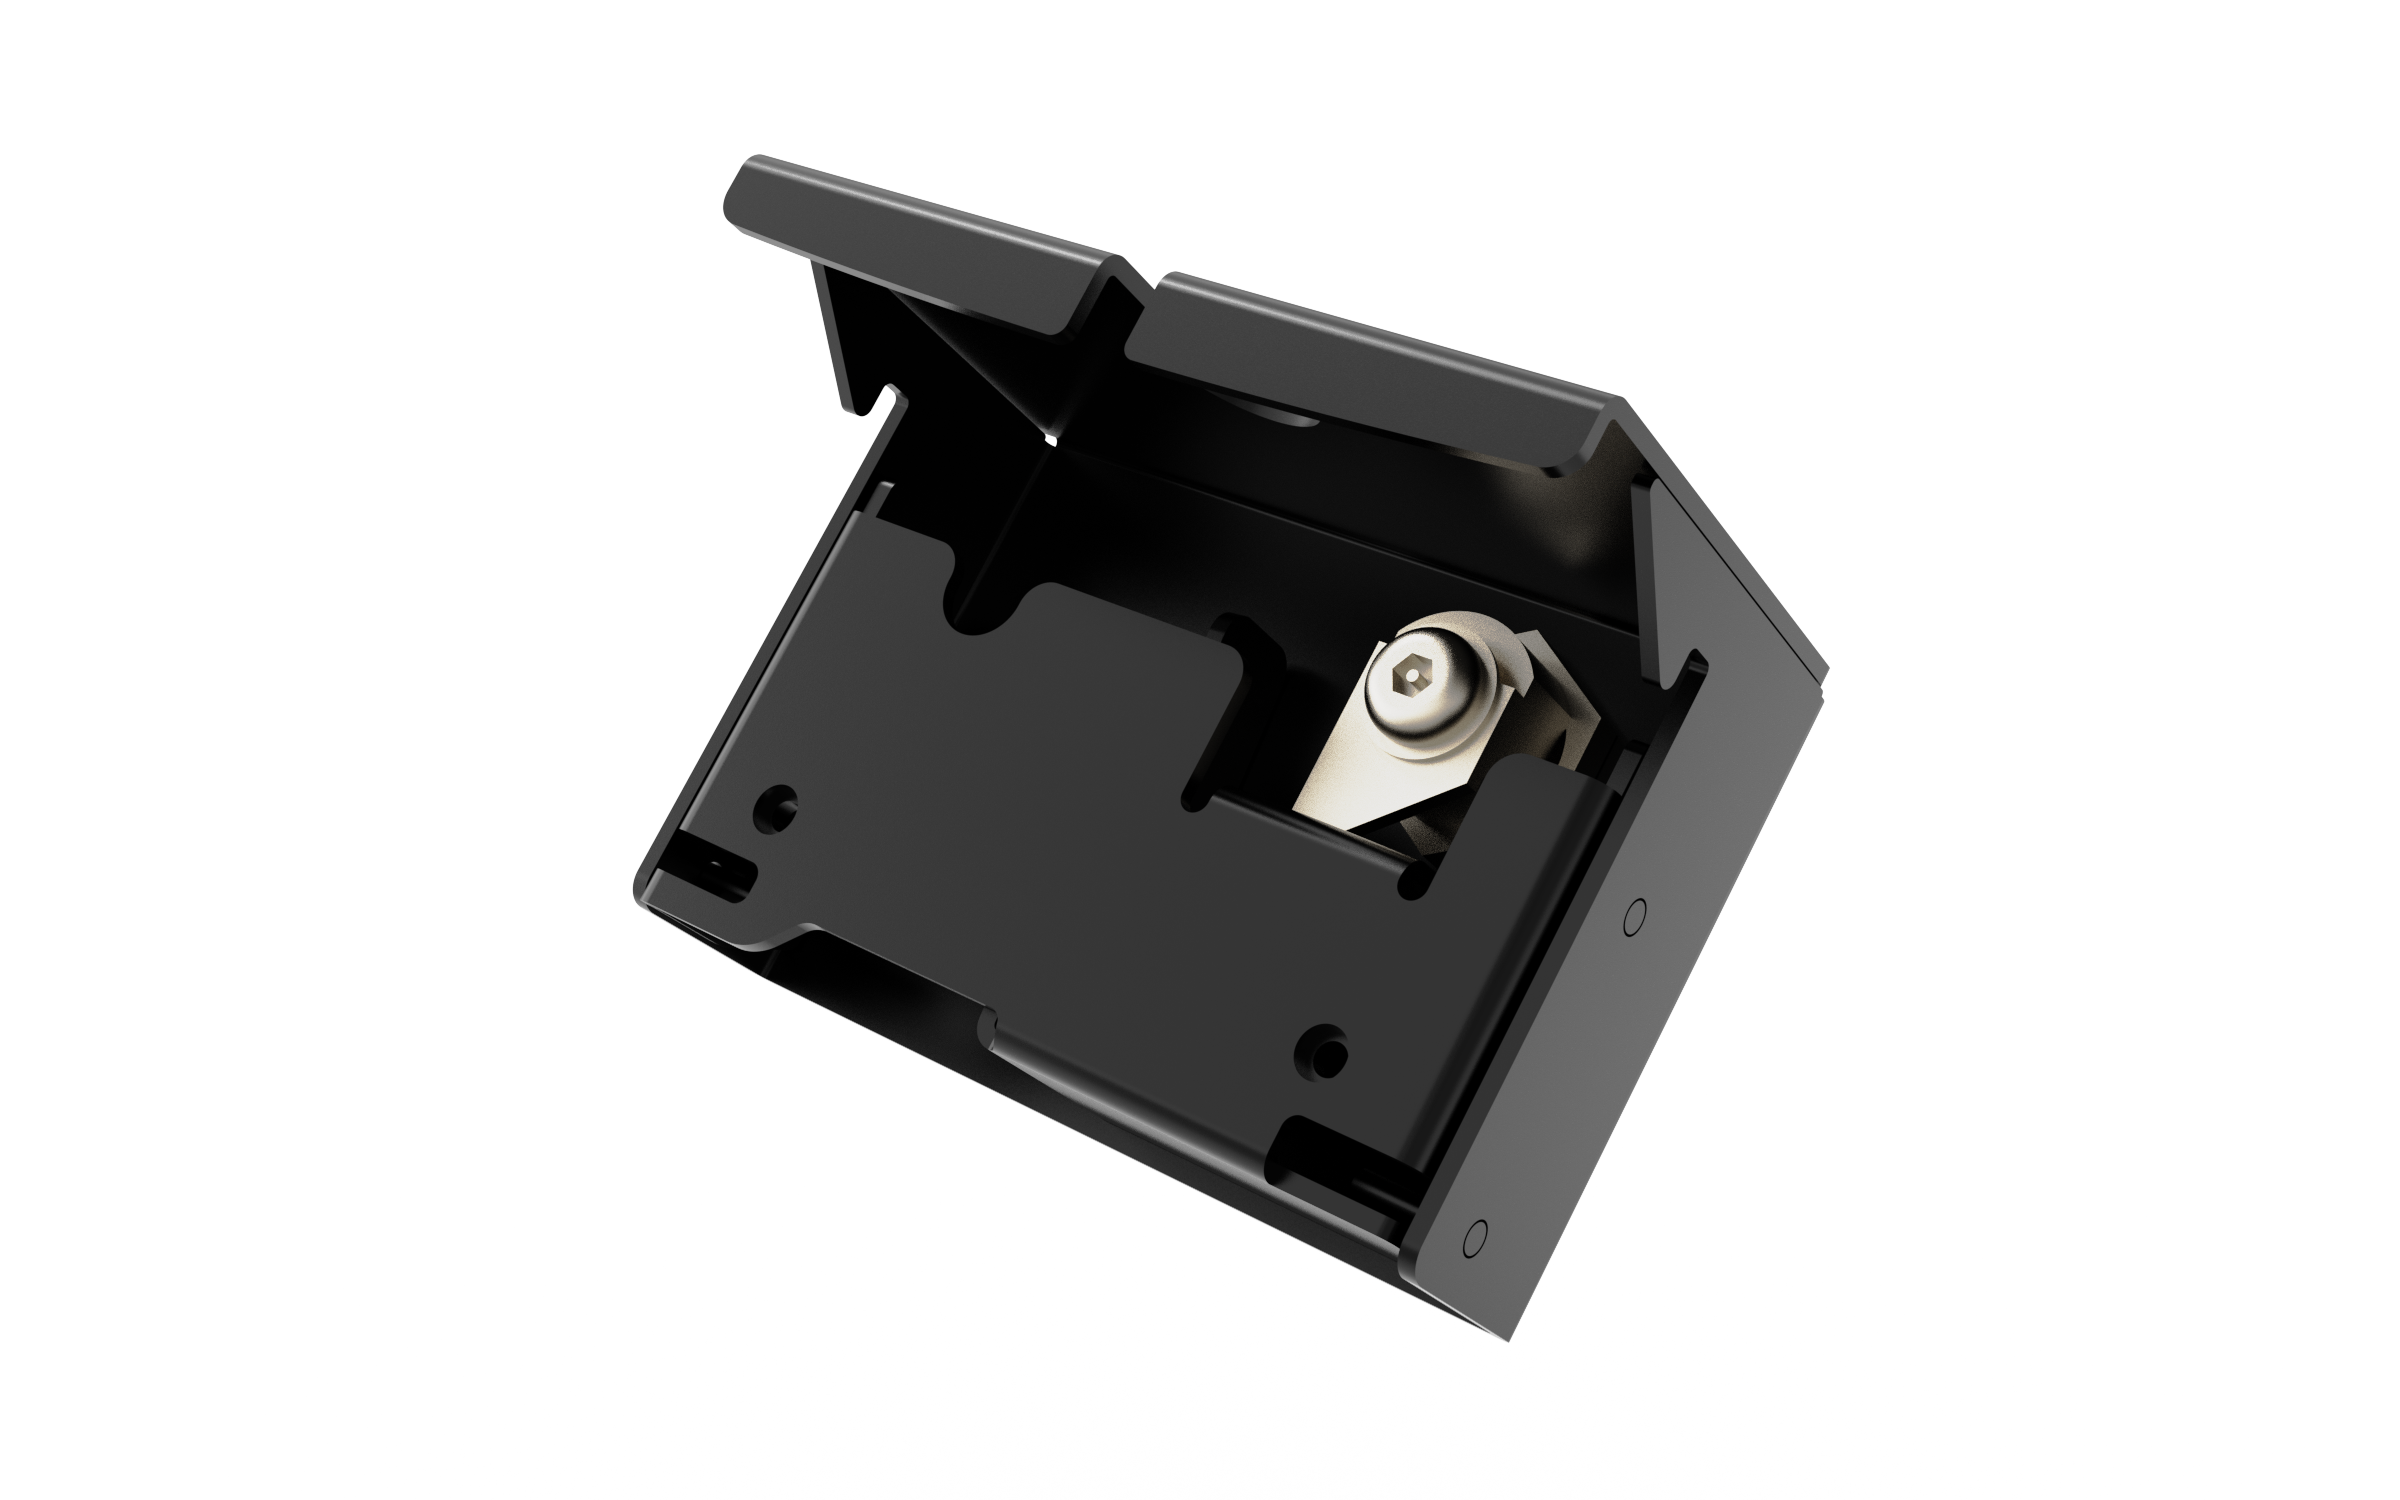 Rear Locking Add-On Kit for Verifone M424 Payment Terminals